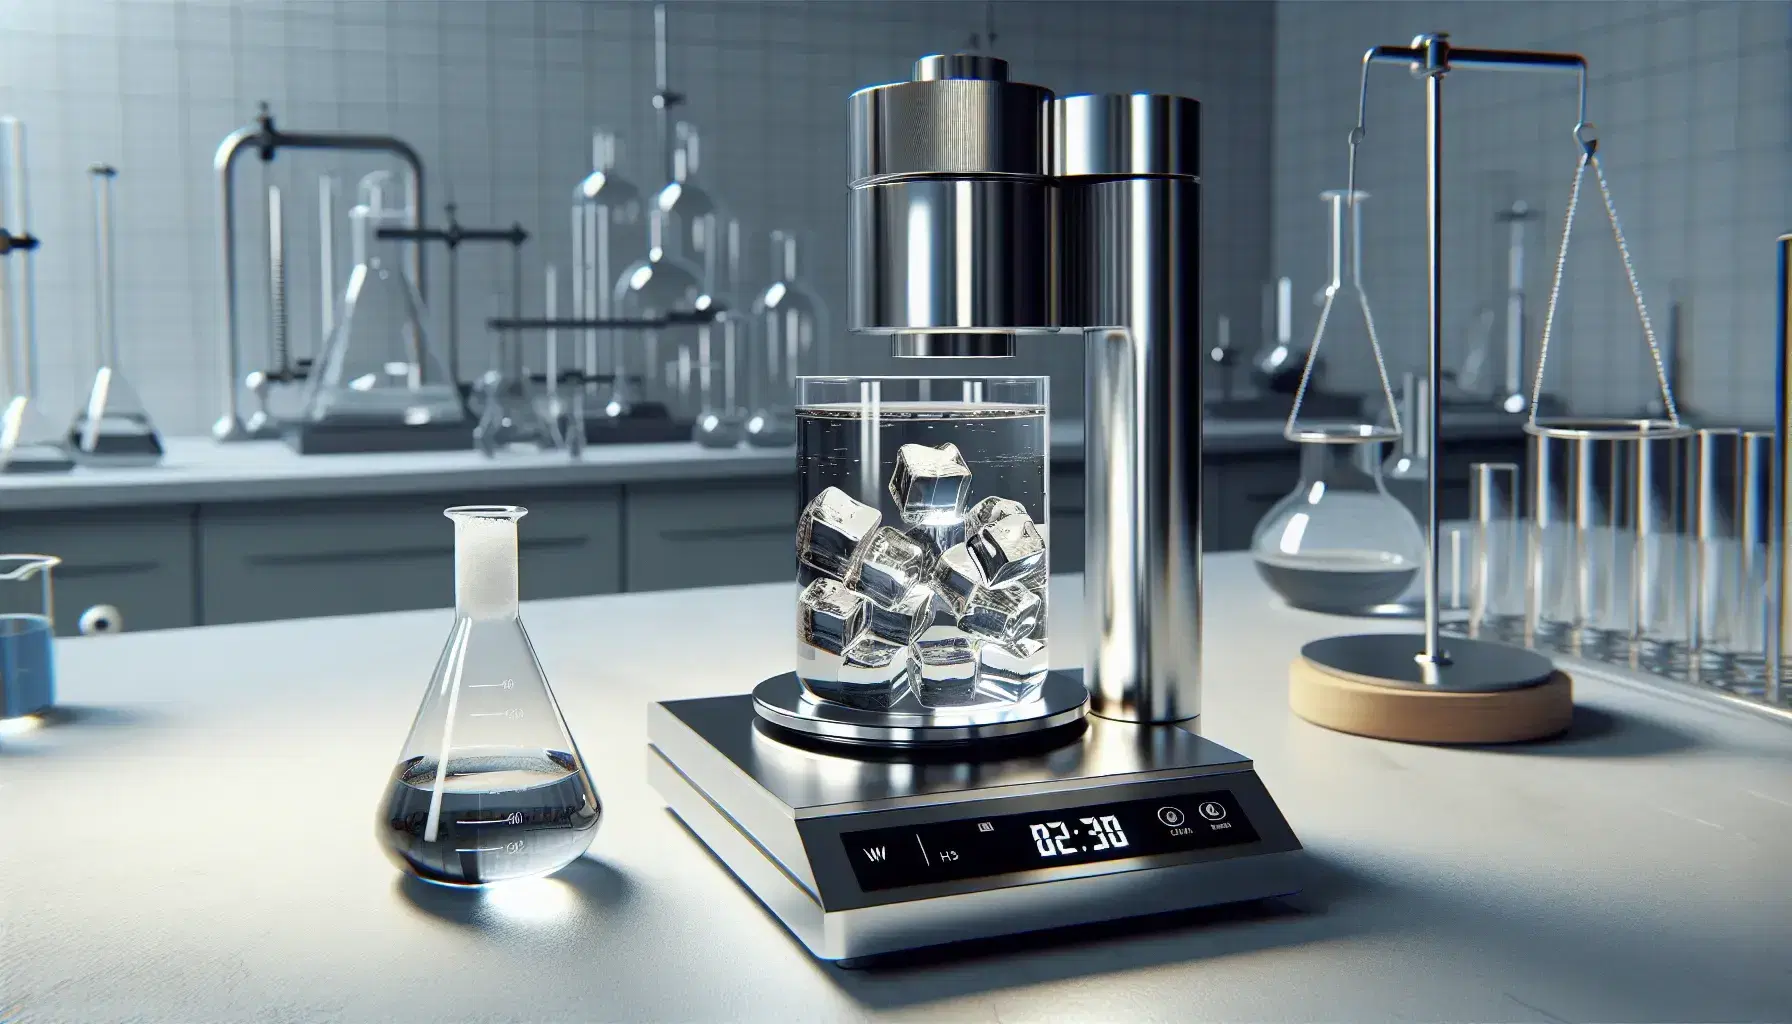 Laboratory with cylindrical metal calorimeter, beaker with water and ice on digital scale, chemical glassware on light bench.